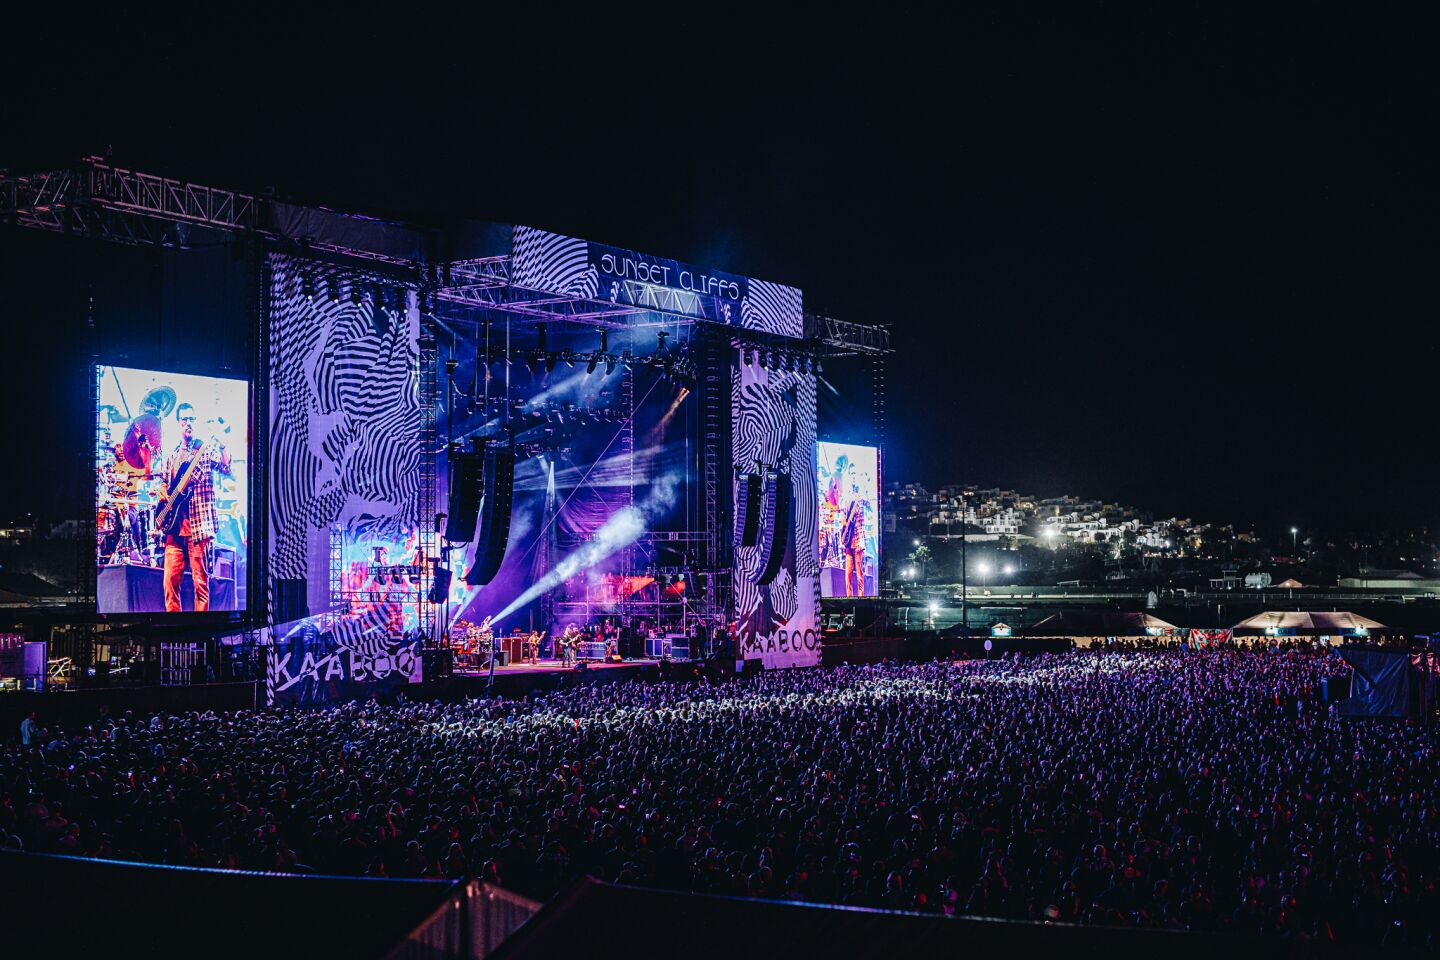 Day 2 of KAABOO Del Mar featured performances from Switchfoot, Sublime with Rome and Dave Matthews Band, plus a silent disco.